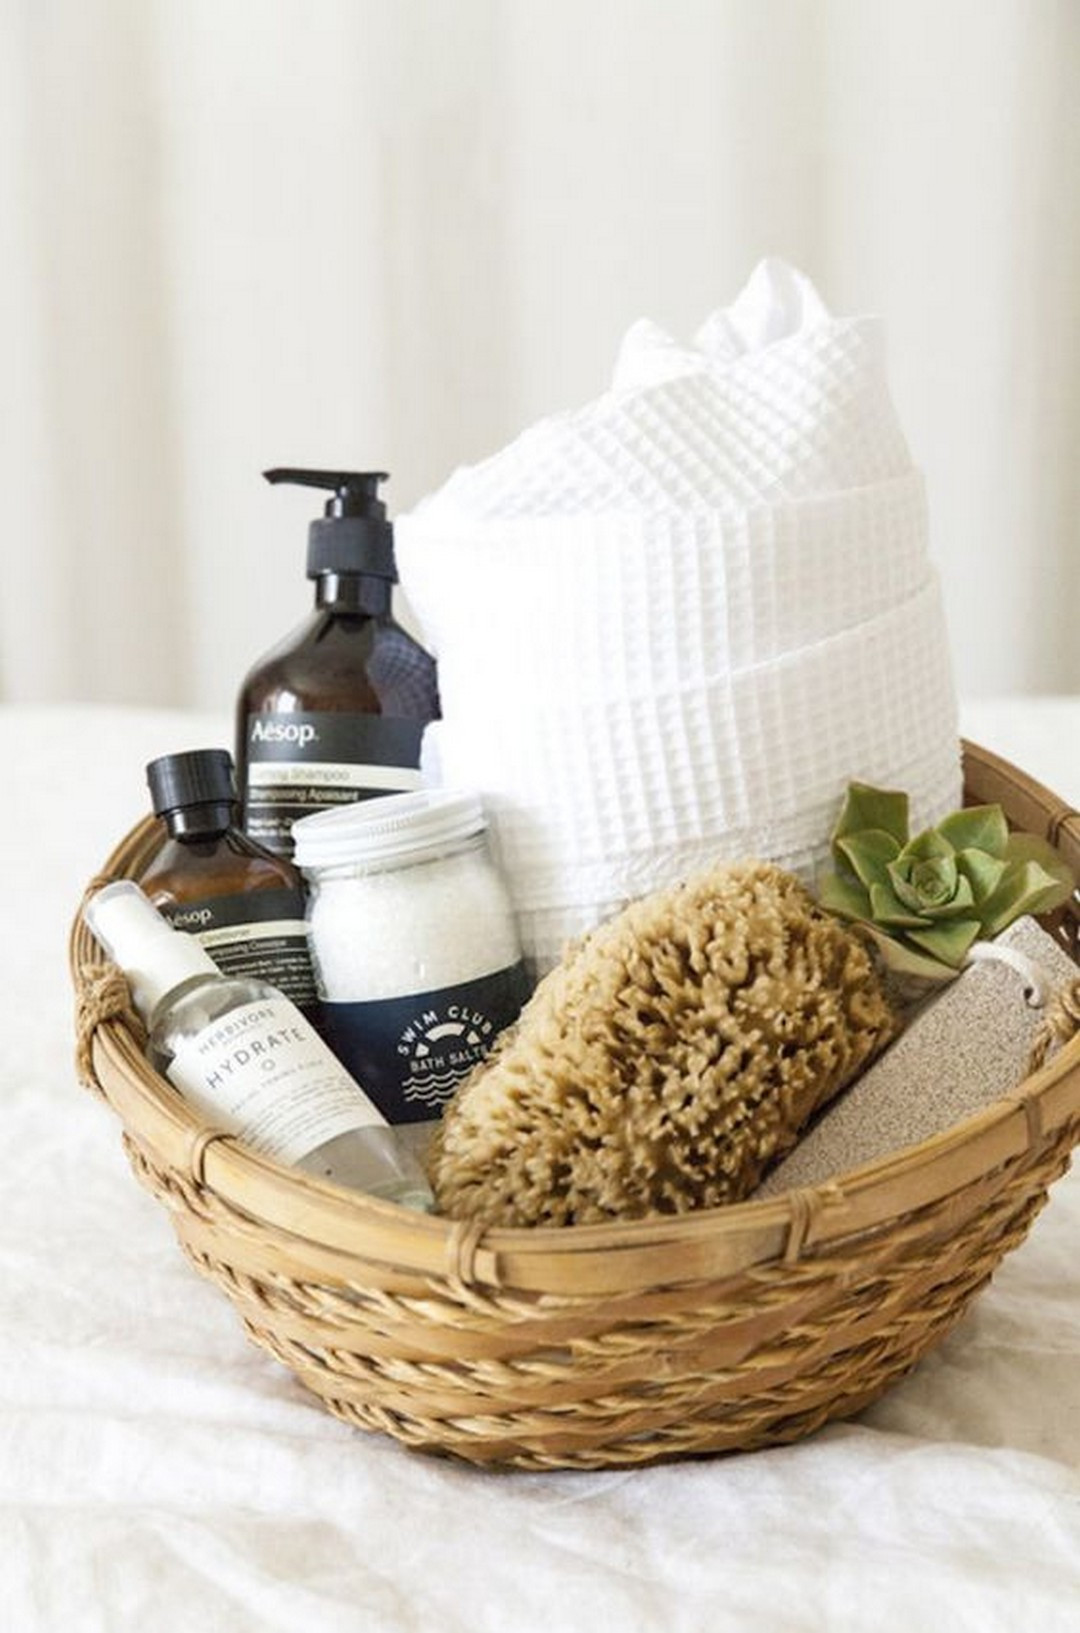 Making Gift Baskets Ideas
 How to Easily Make Aesthetic Bathroom Gift Basket Designs